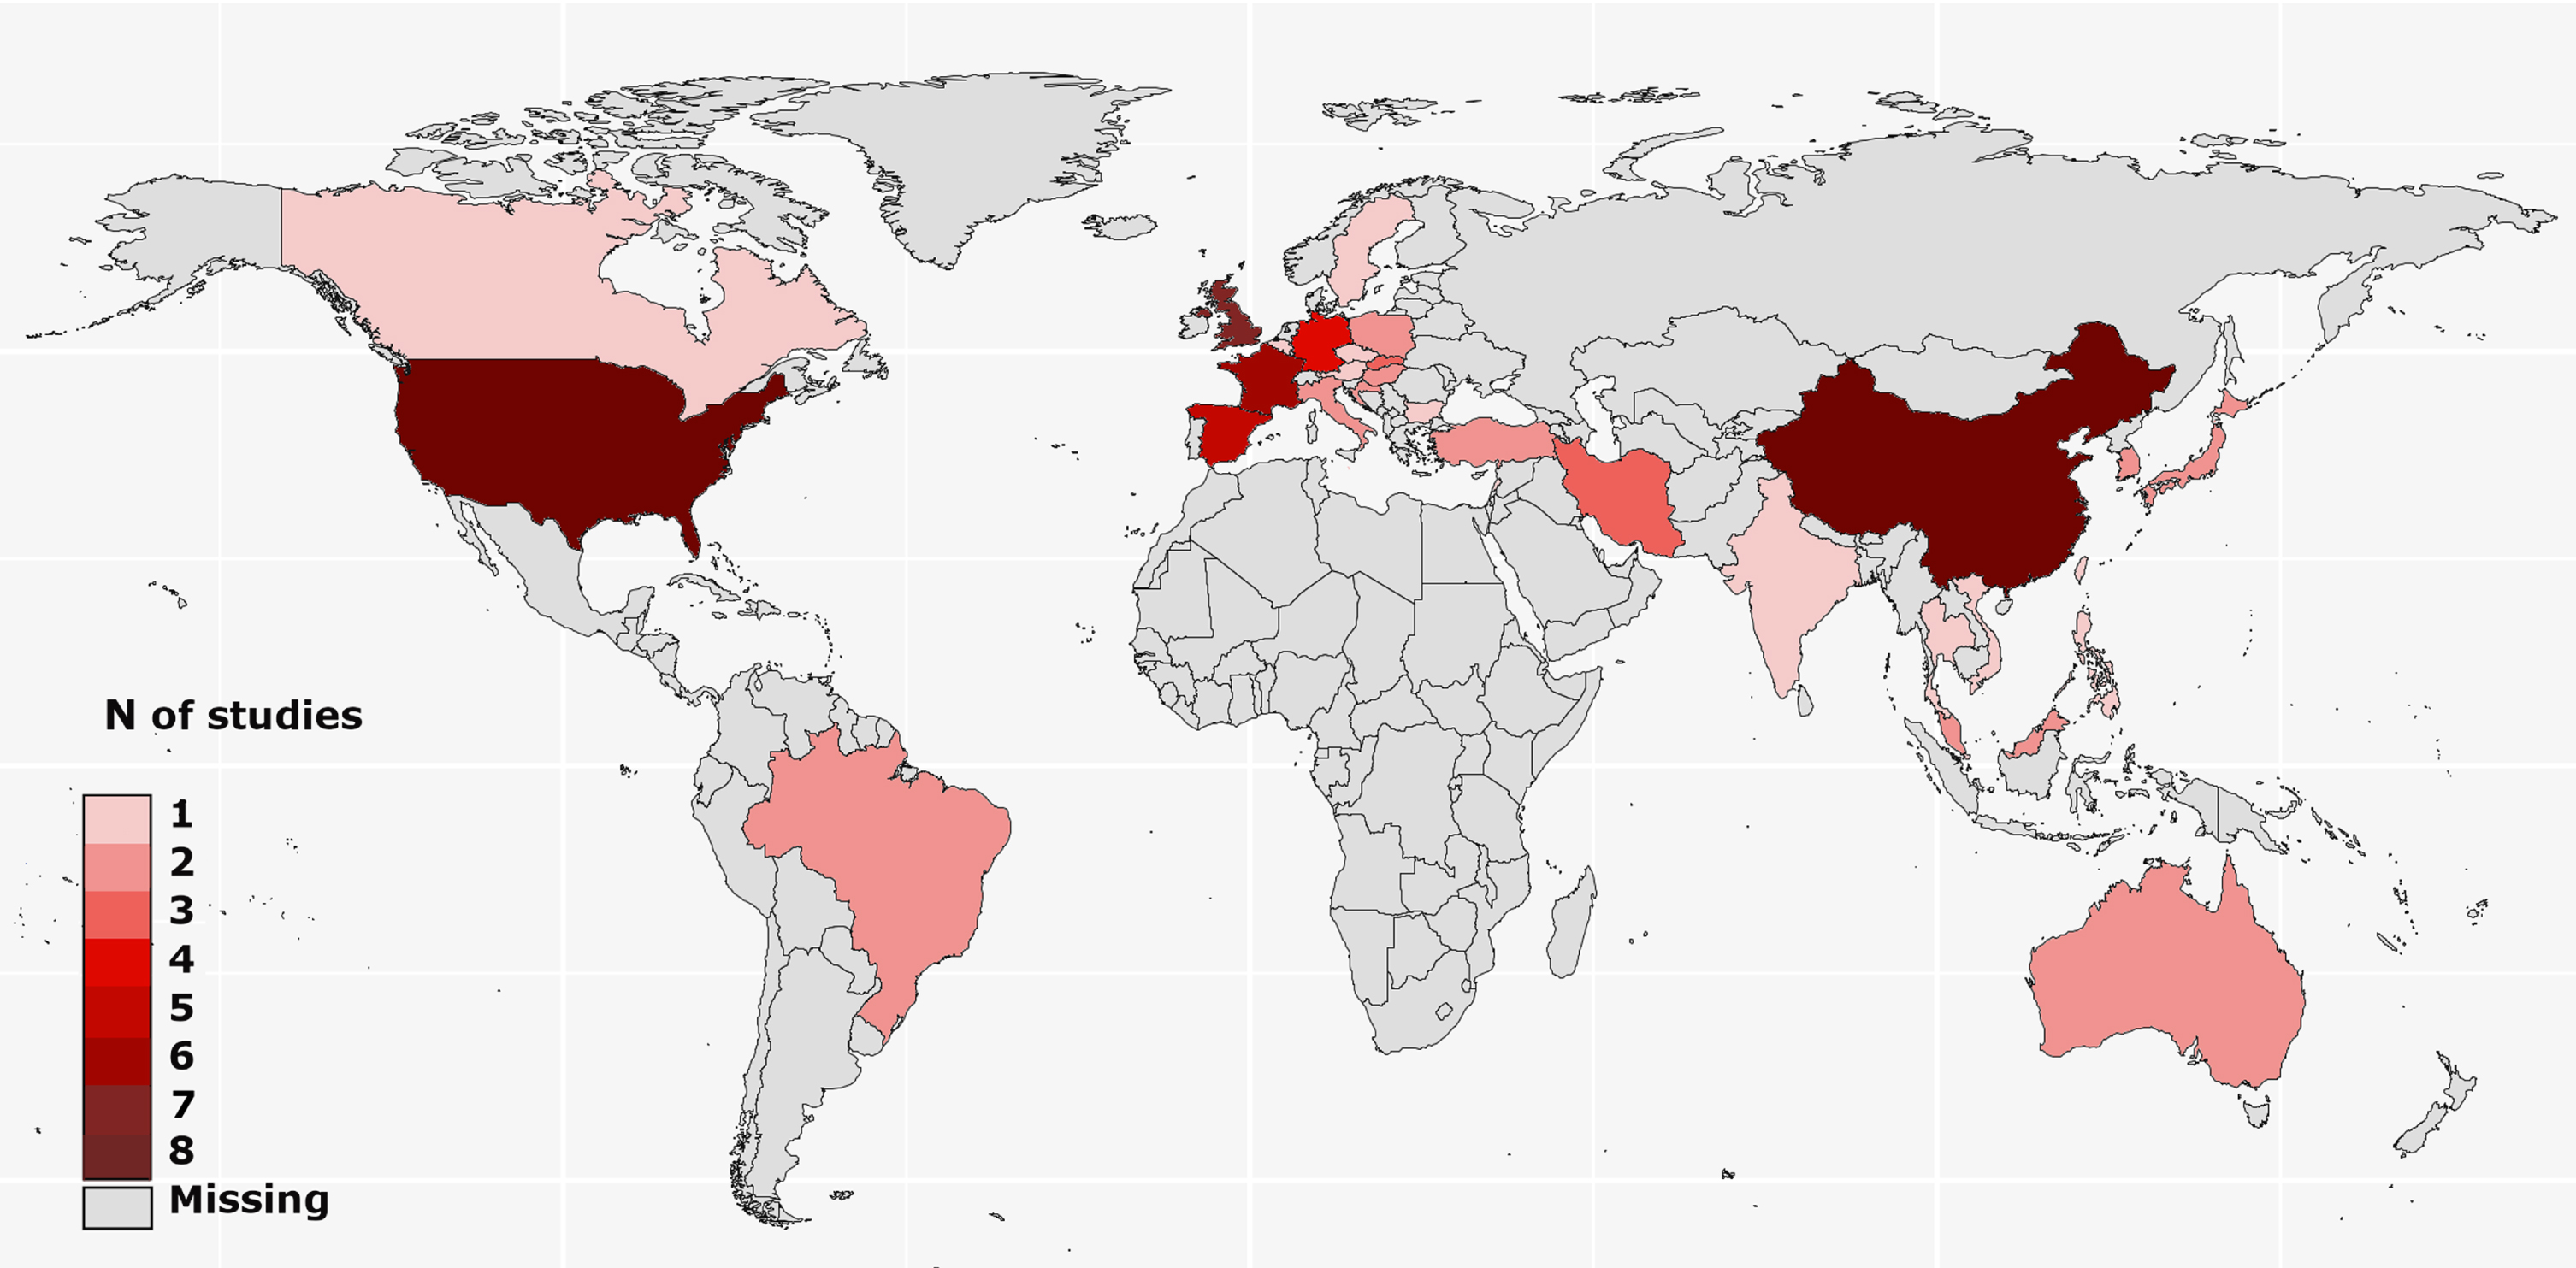 Geographical distribution of the studies on stigma in Parkinson’s disease.